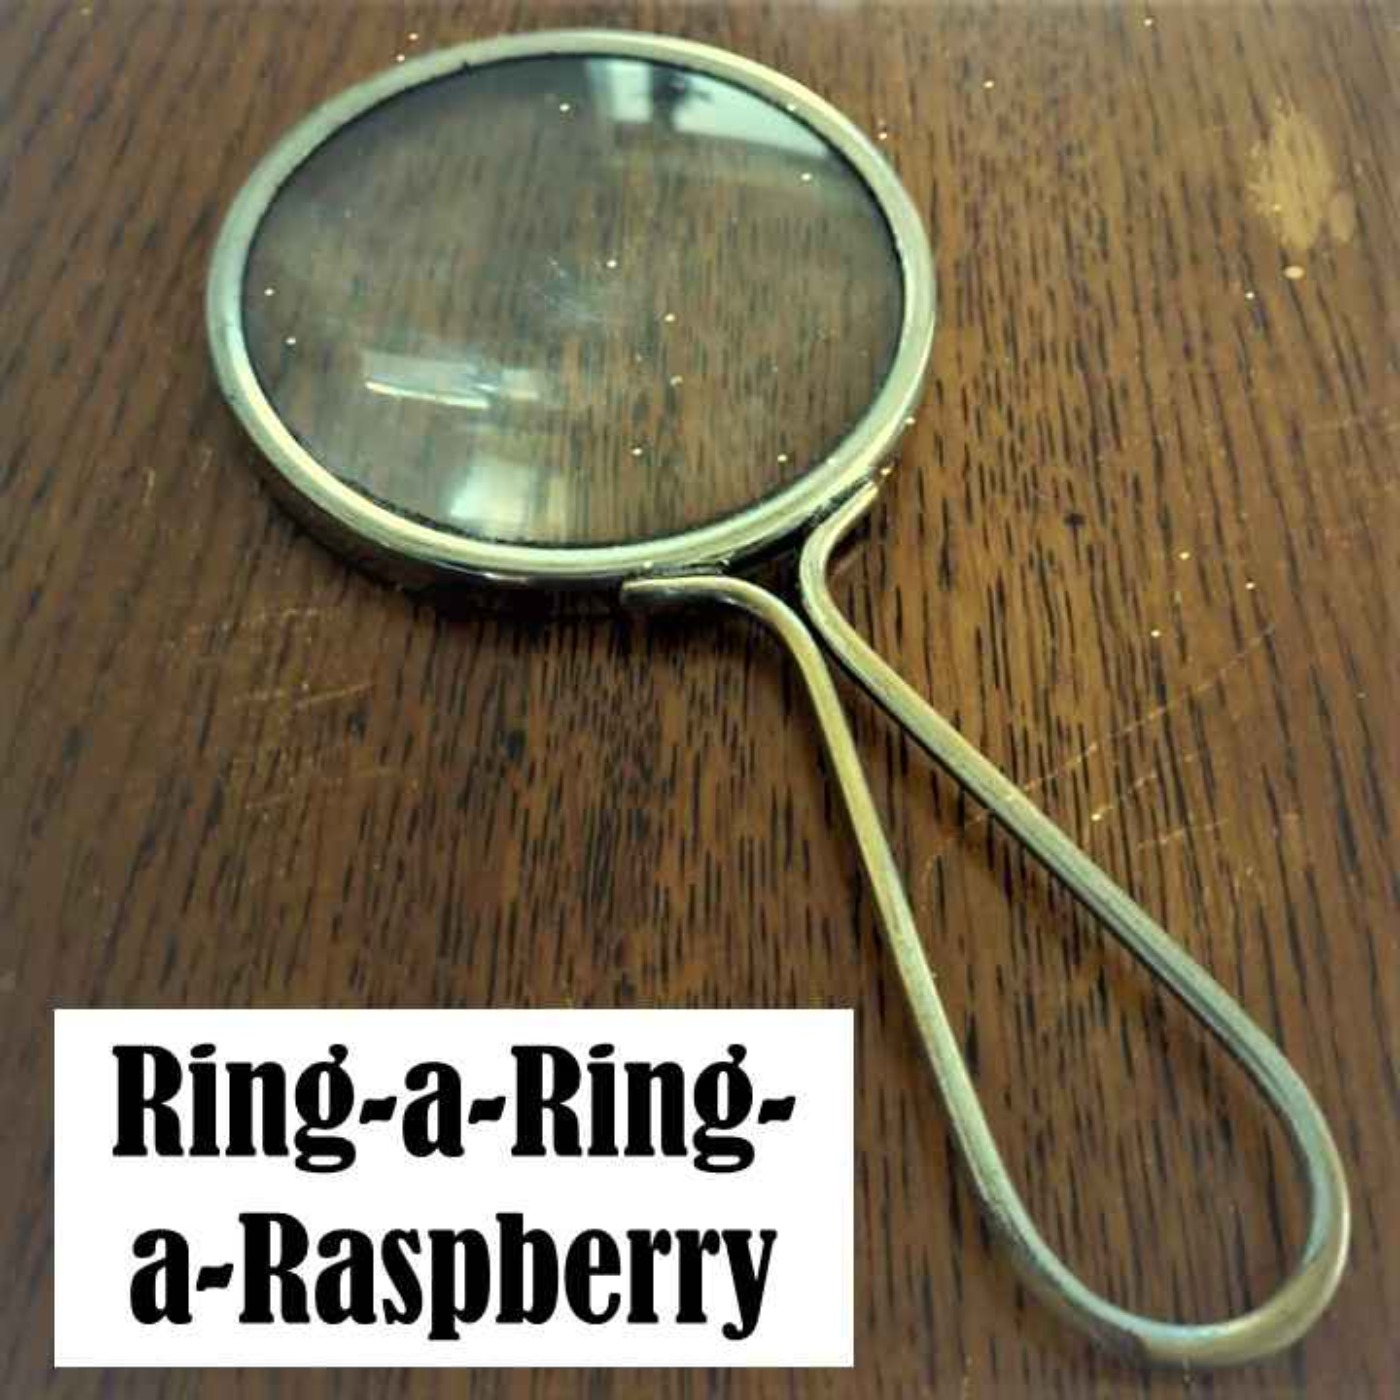 The Quiet Men of England Episode 5: Ring-a-Ring-a-Raspberry